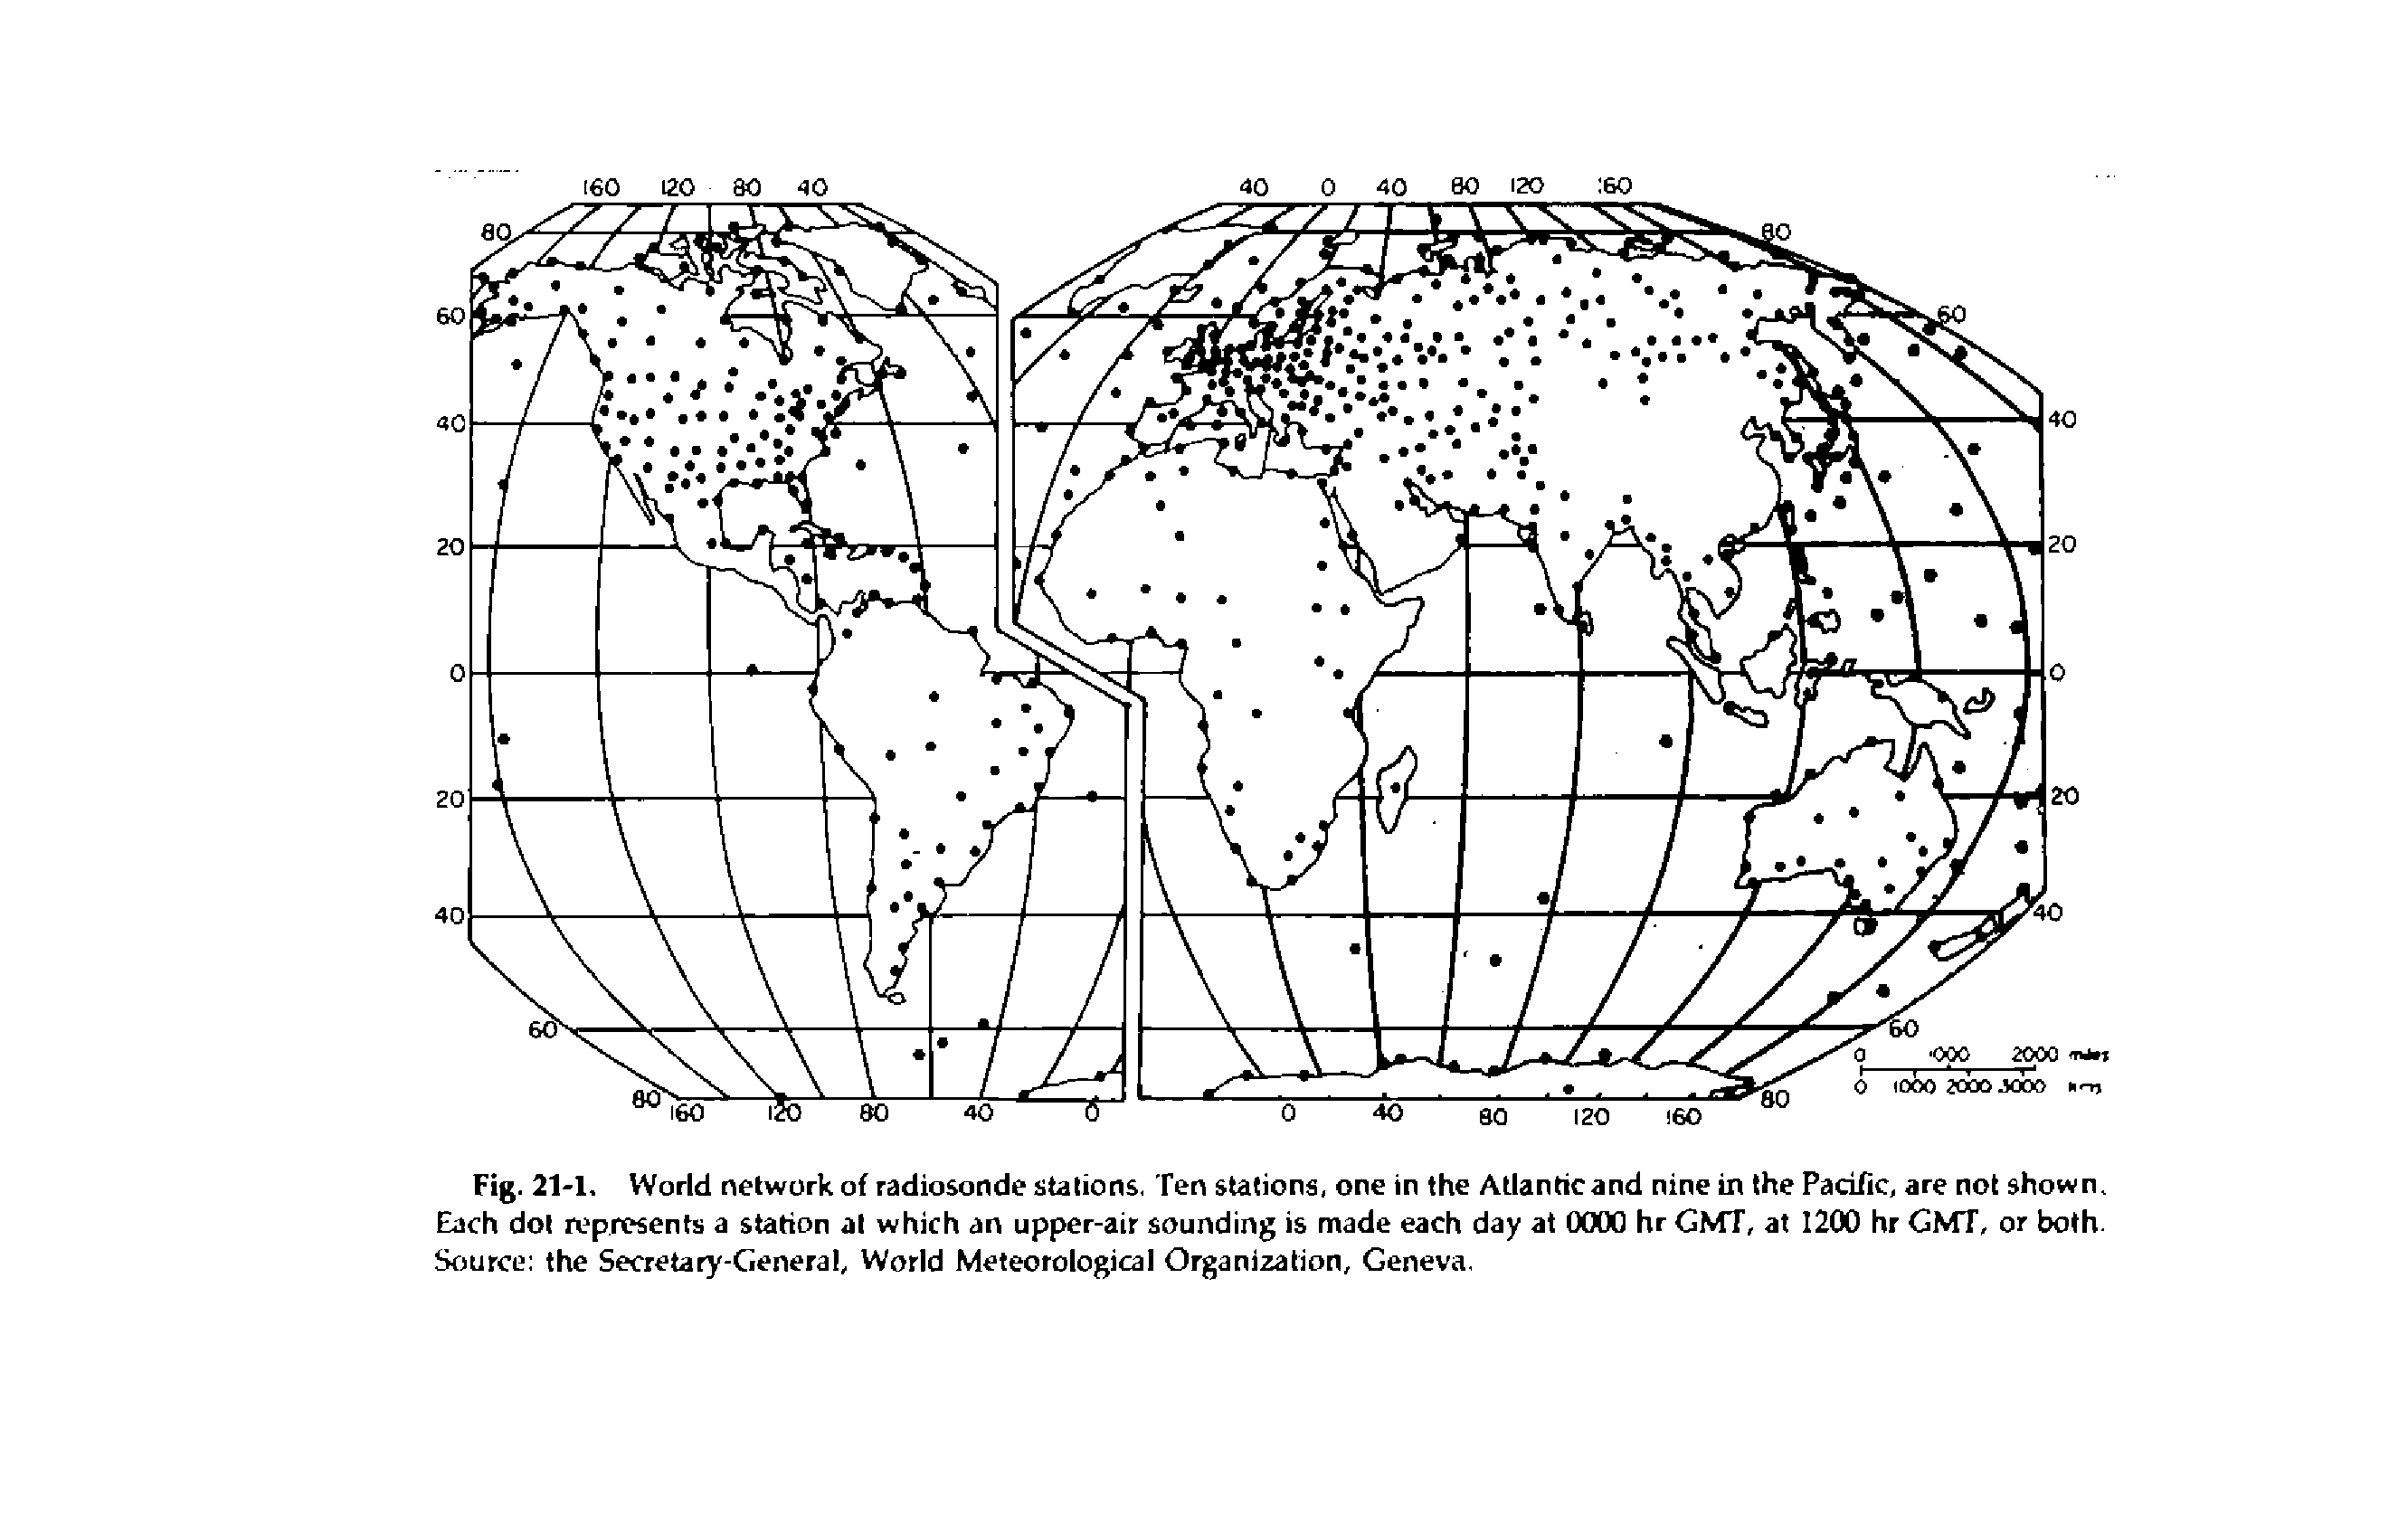 Fig. 21-1, World network of radiosonde stations, Ten stations, one in the Atlanticand nine in the Pacific, are not shown. Each dot presents a station at which an upper-air sounding is made each day at 0000 hr GMT, at 1200 hr GMT, or both. Source the Secretary-General, World Meteorological Organization, Geneva.